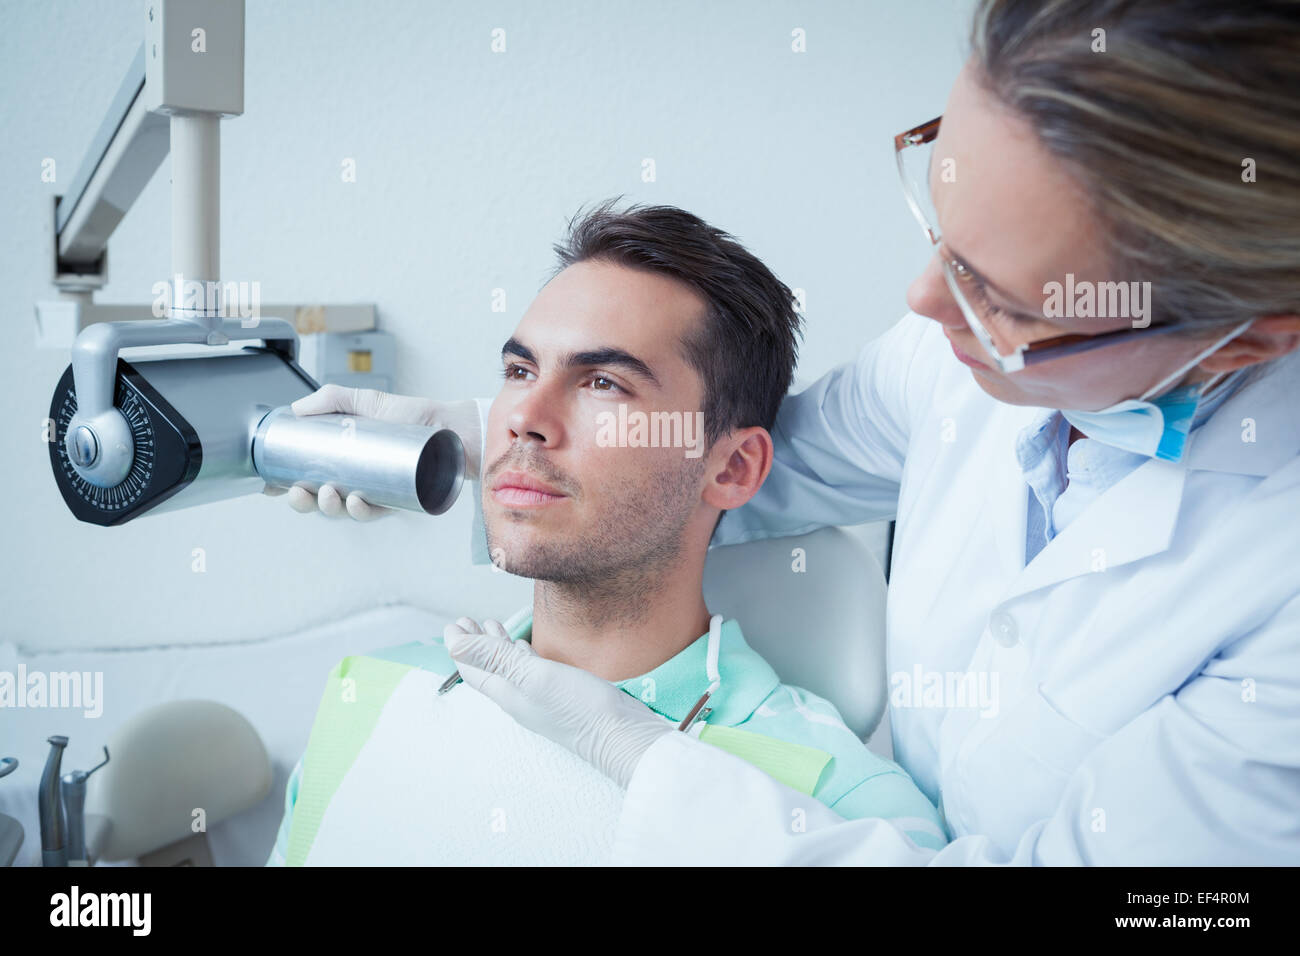 Serious young man undergoing dental checkup Stock Photo